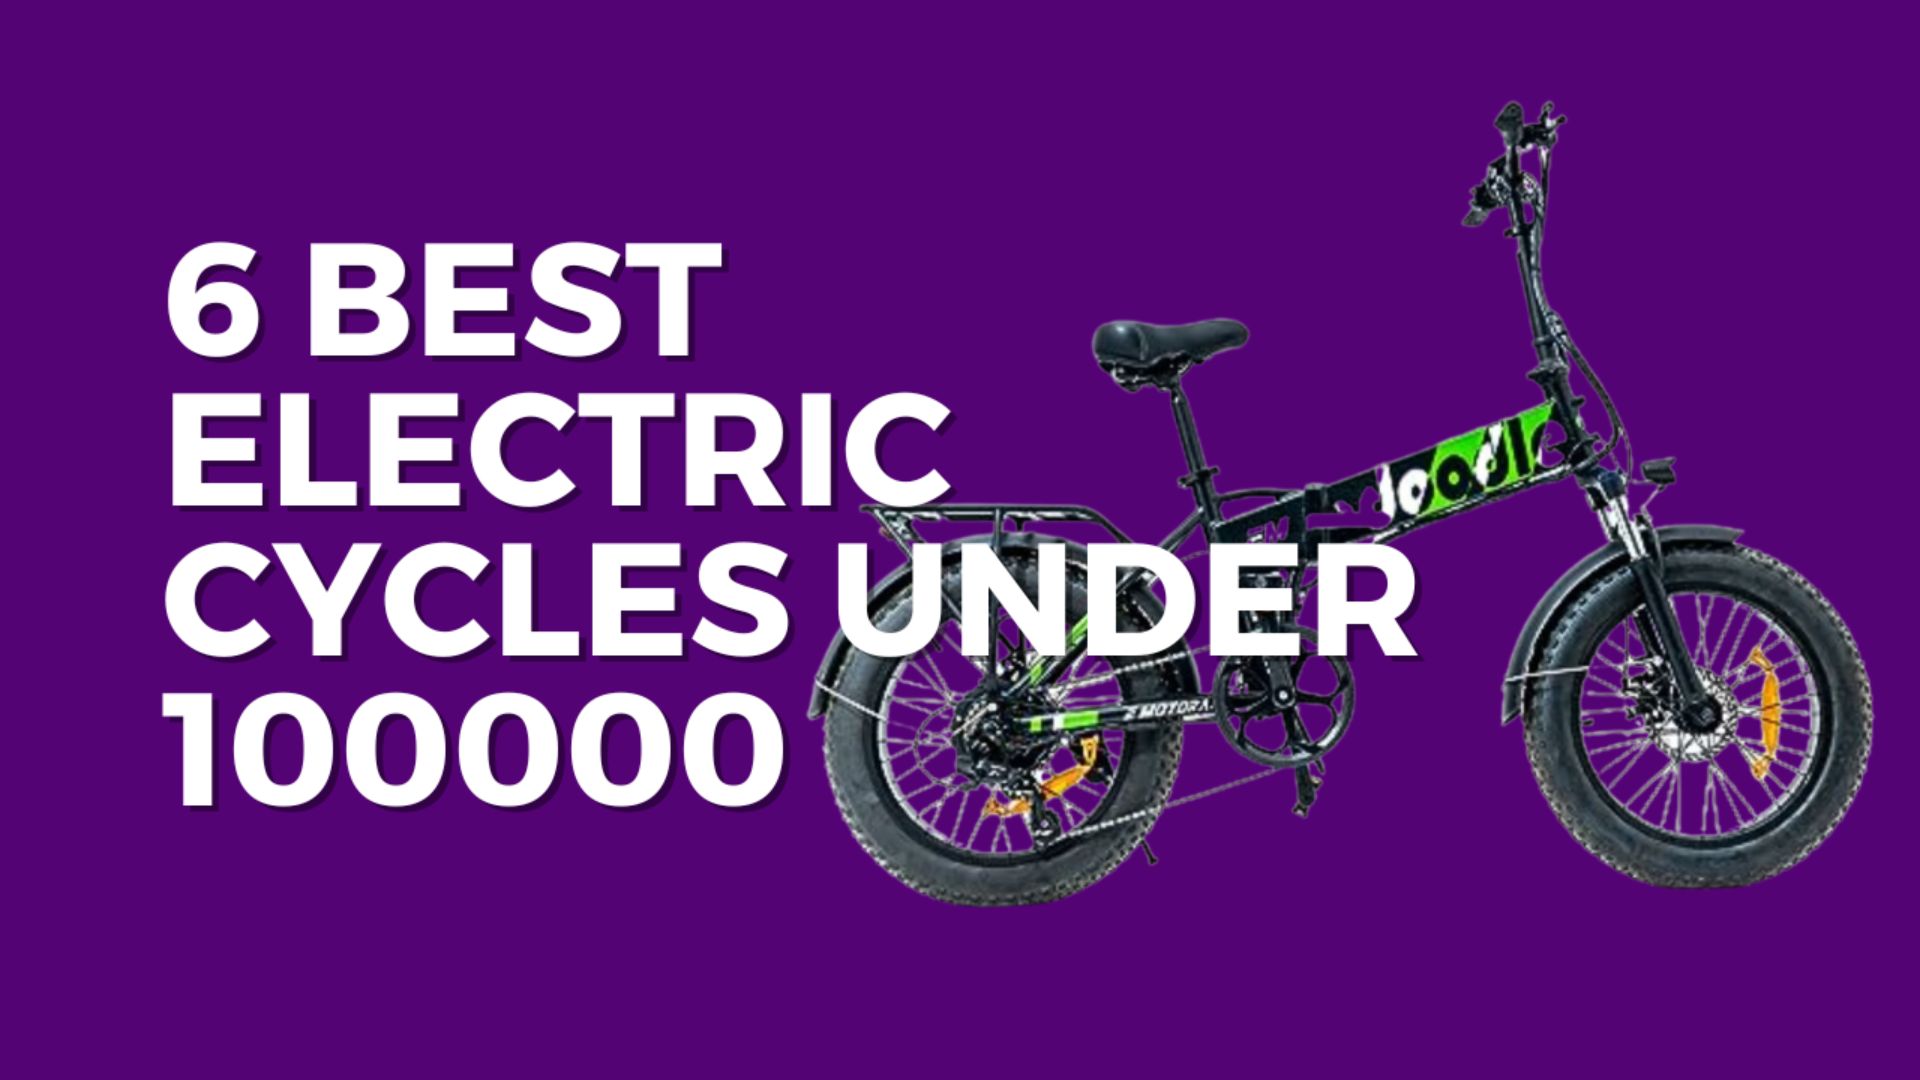 6 Best Electric Cycles Under 100000